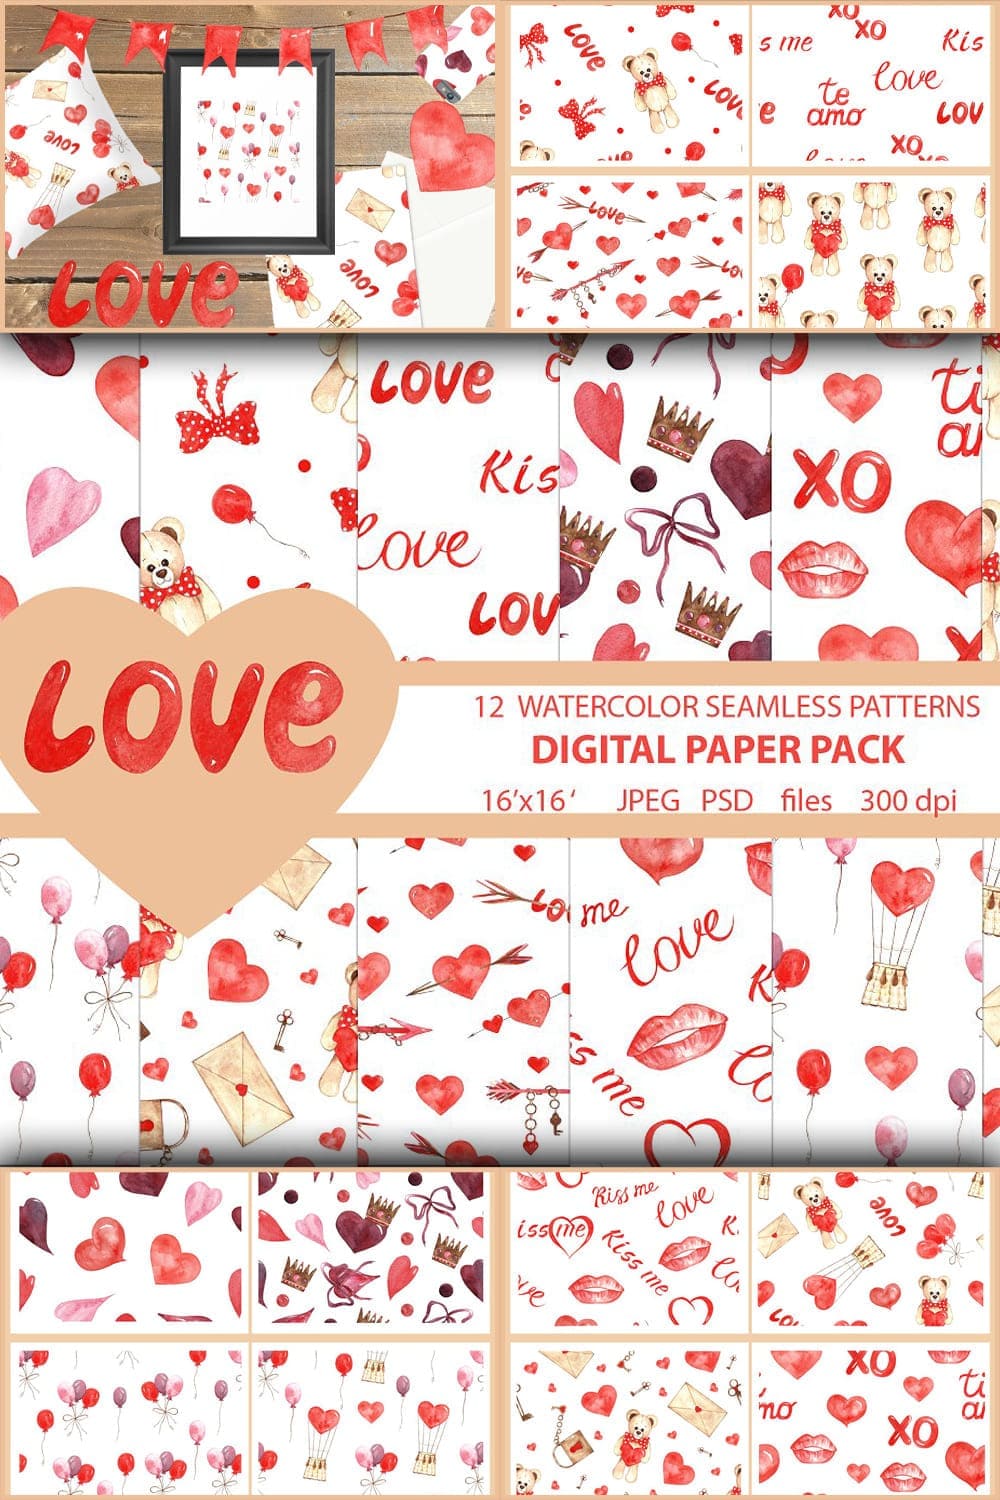 Watercolor seamless patterns about love, image for Pinterest 1000x1500.